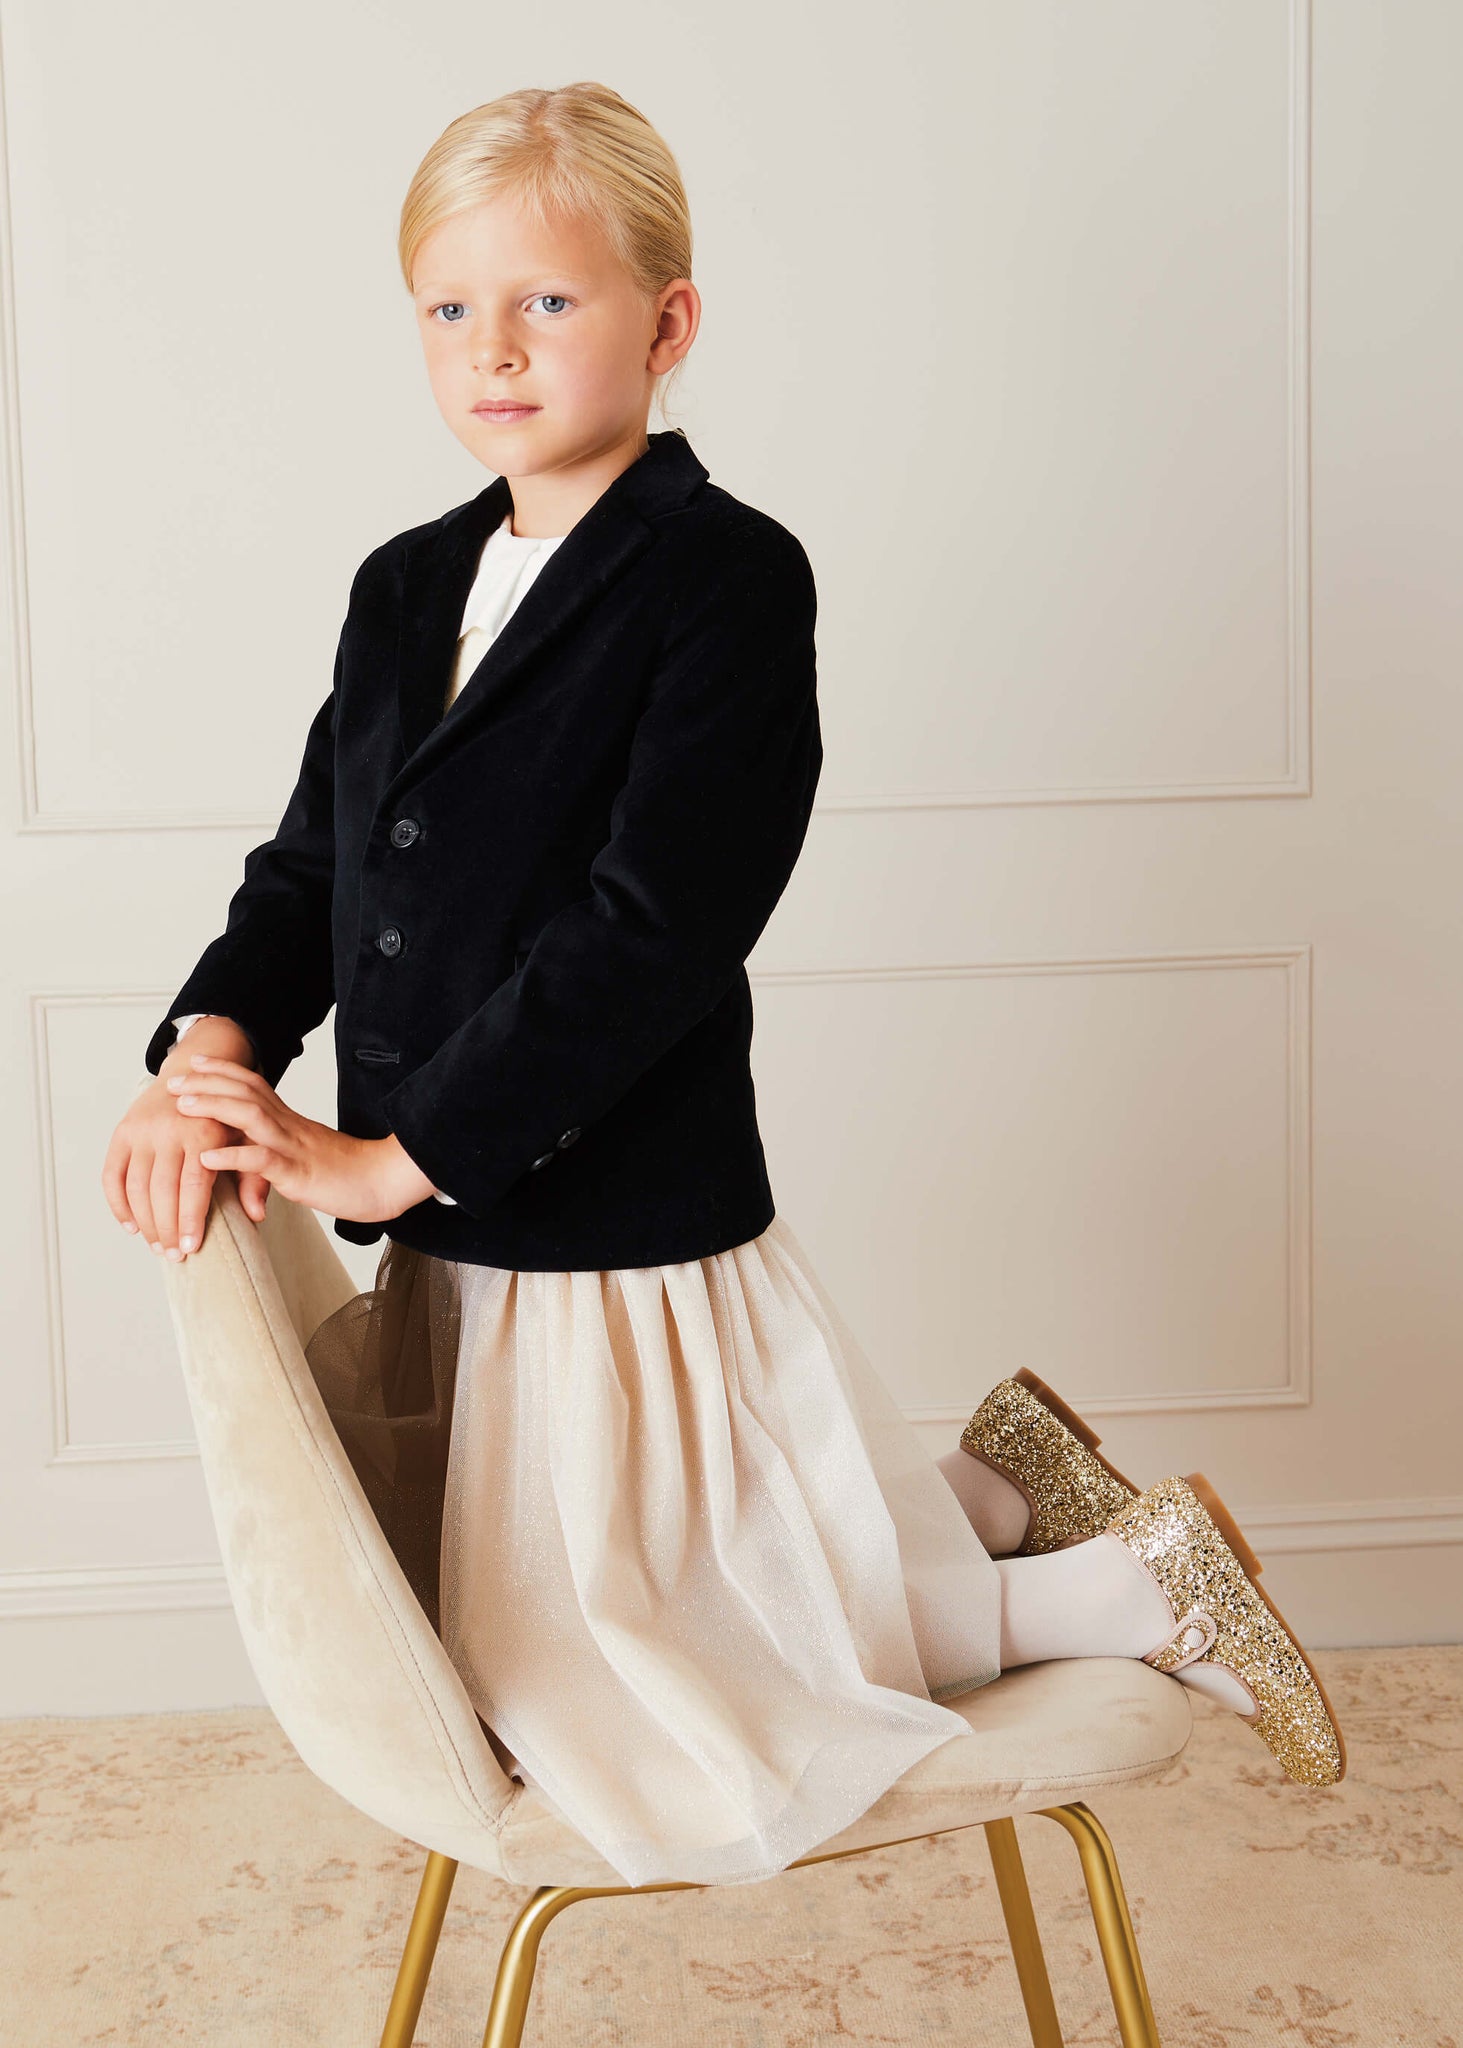 Tulle Glittery Skirt in Gold (18M-10Y)   from Pepa London